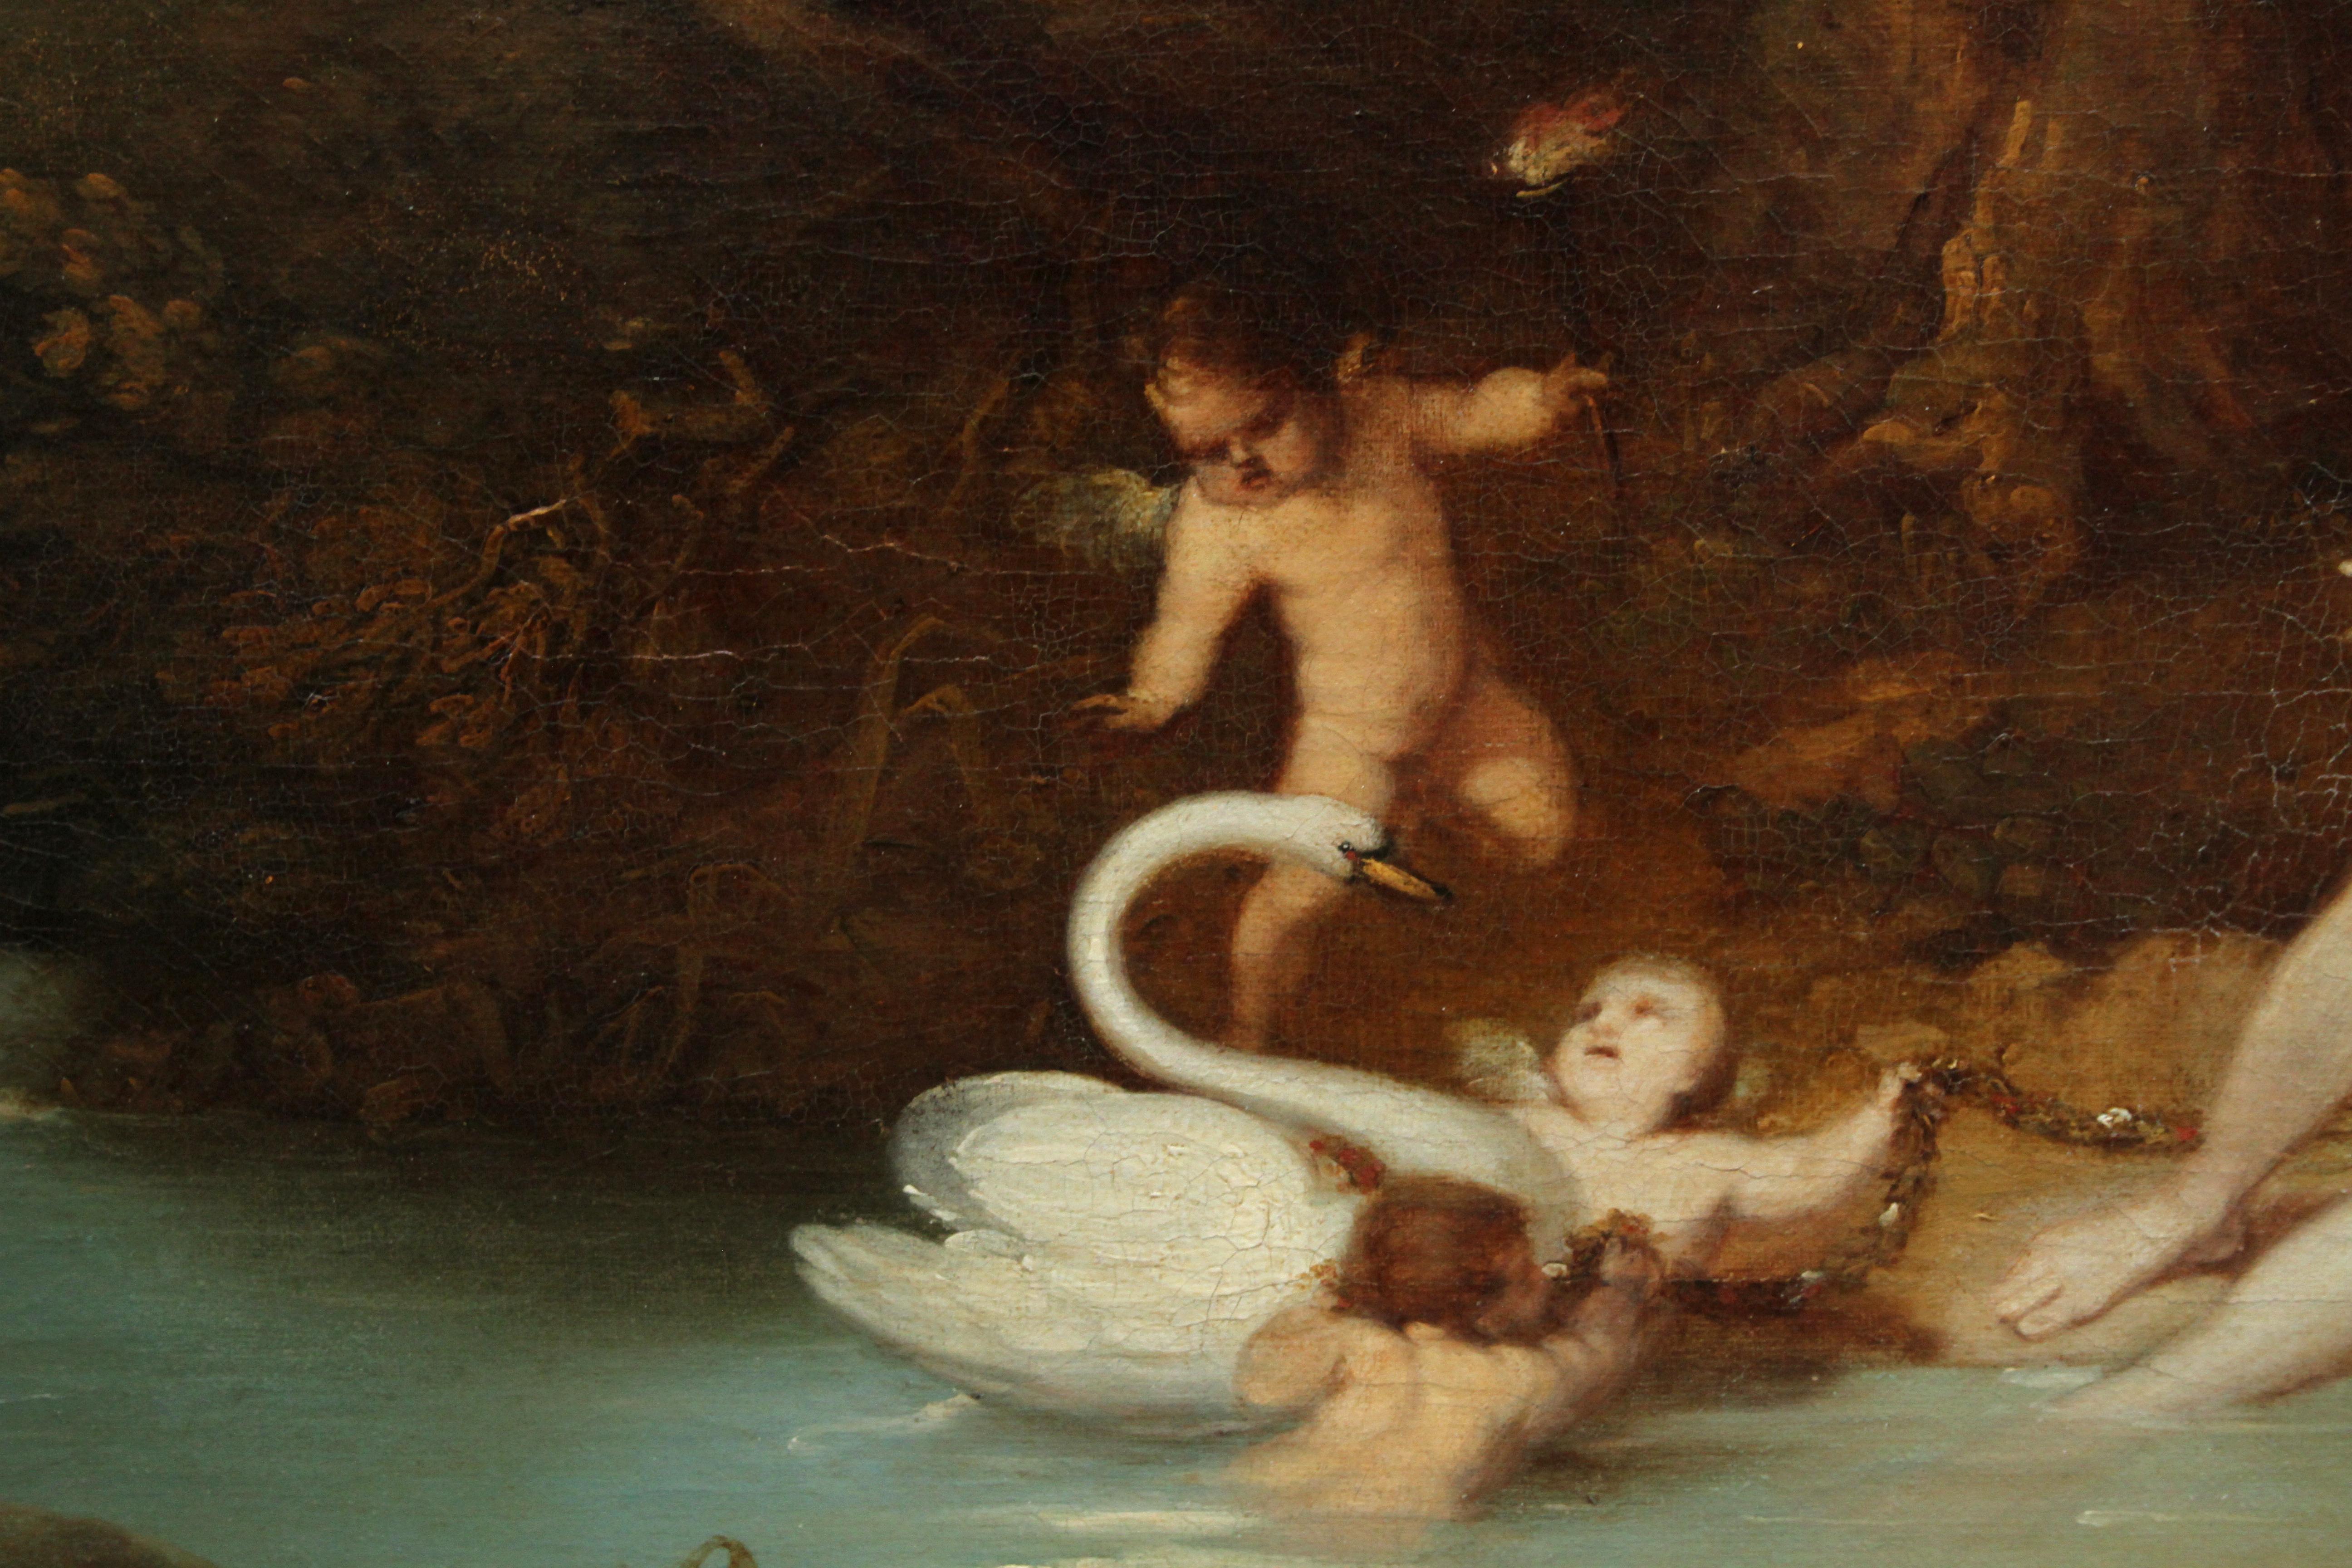 Leda and Swan - 18thC Old Master Continental School mythological oil painting - Brown Landscape Painting by Francisco Viera Portuense